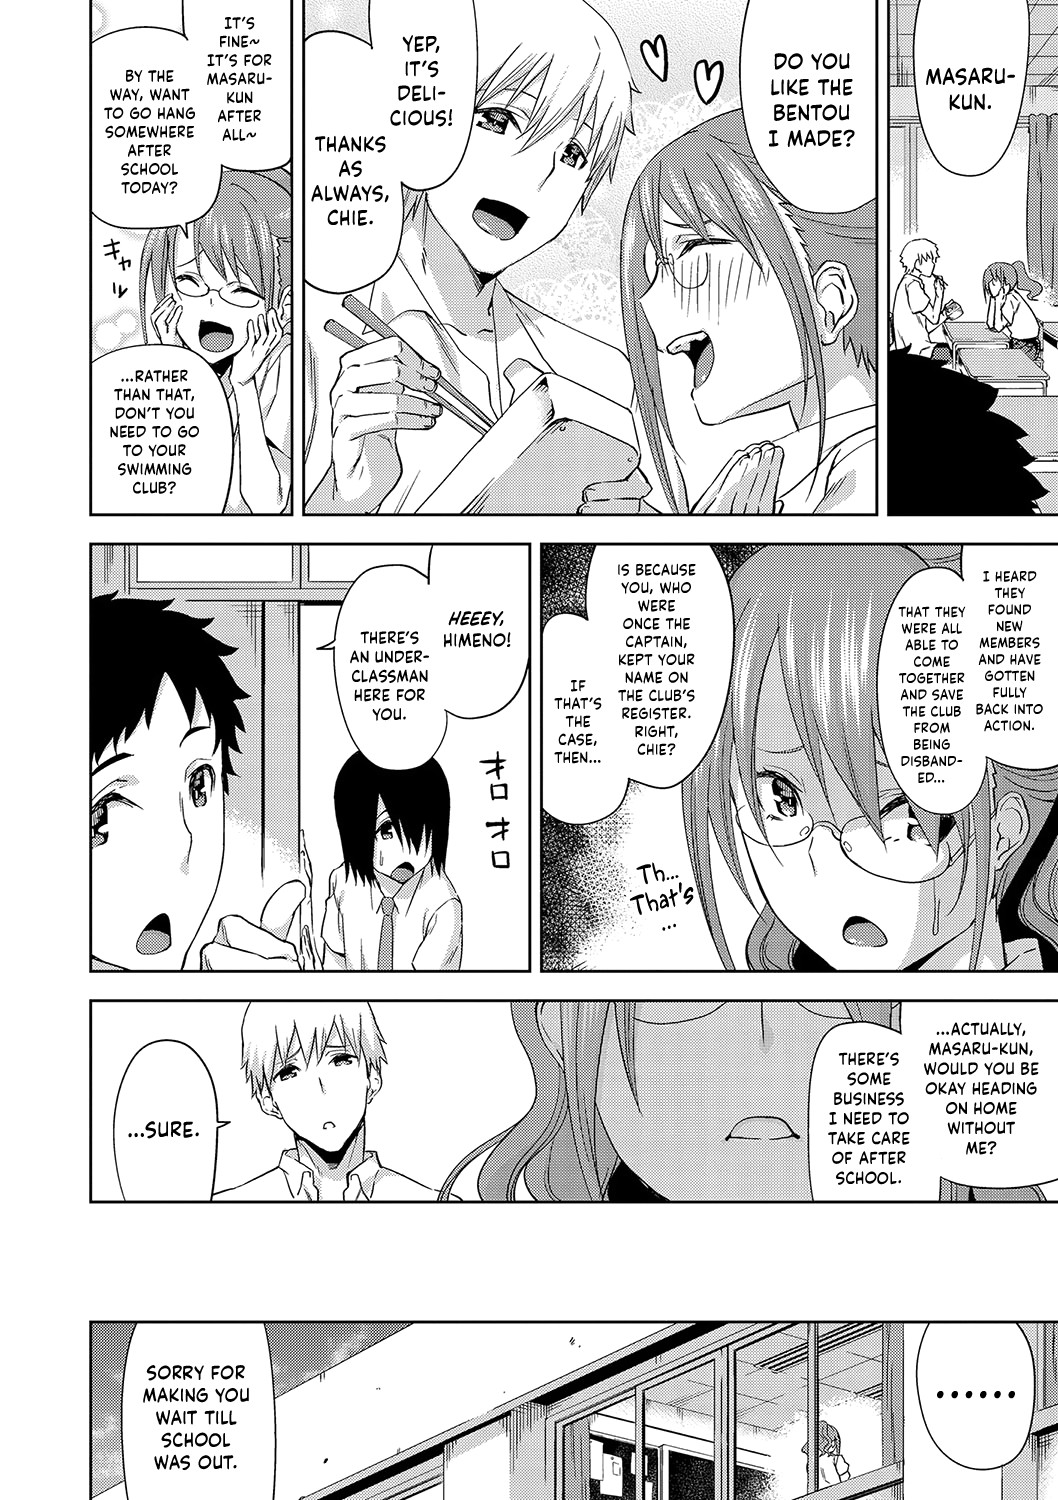 Hentai Manga Comic-Girls From Point Of View-Chapter 10-2